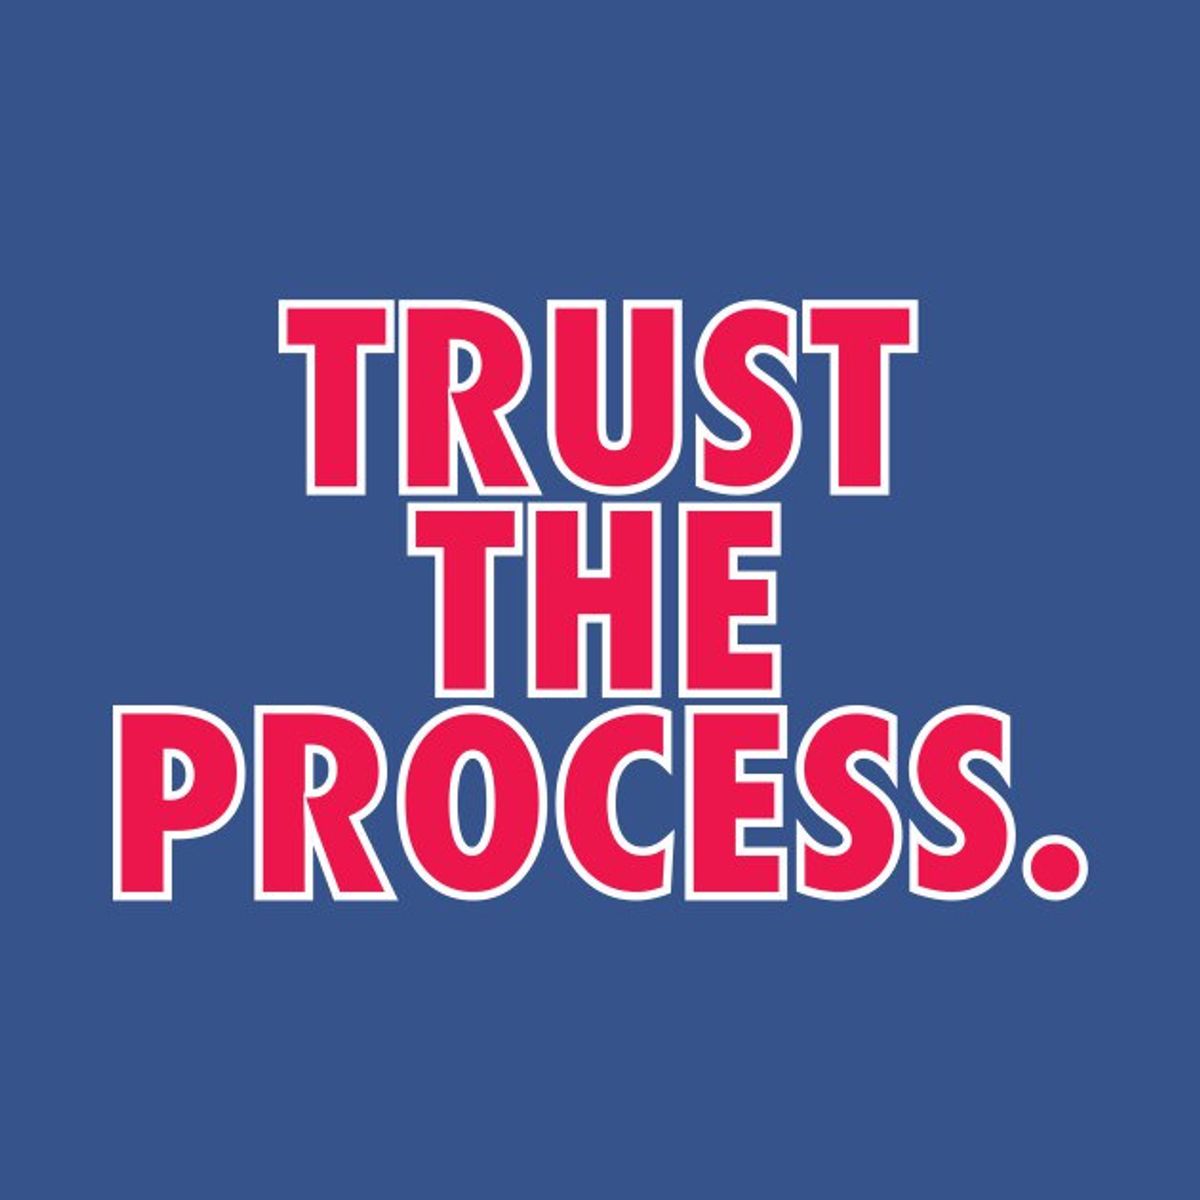 5 Reasons Why To Trust The Process